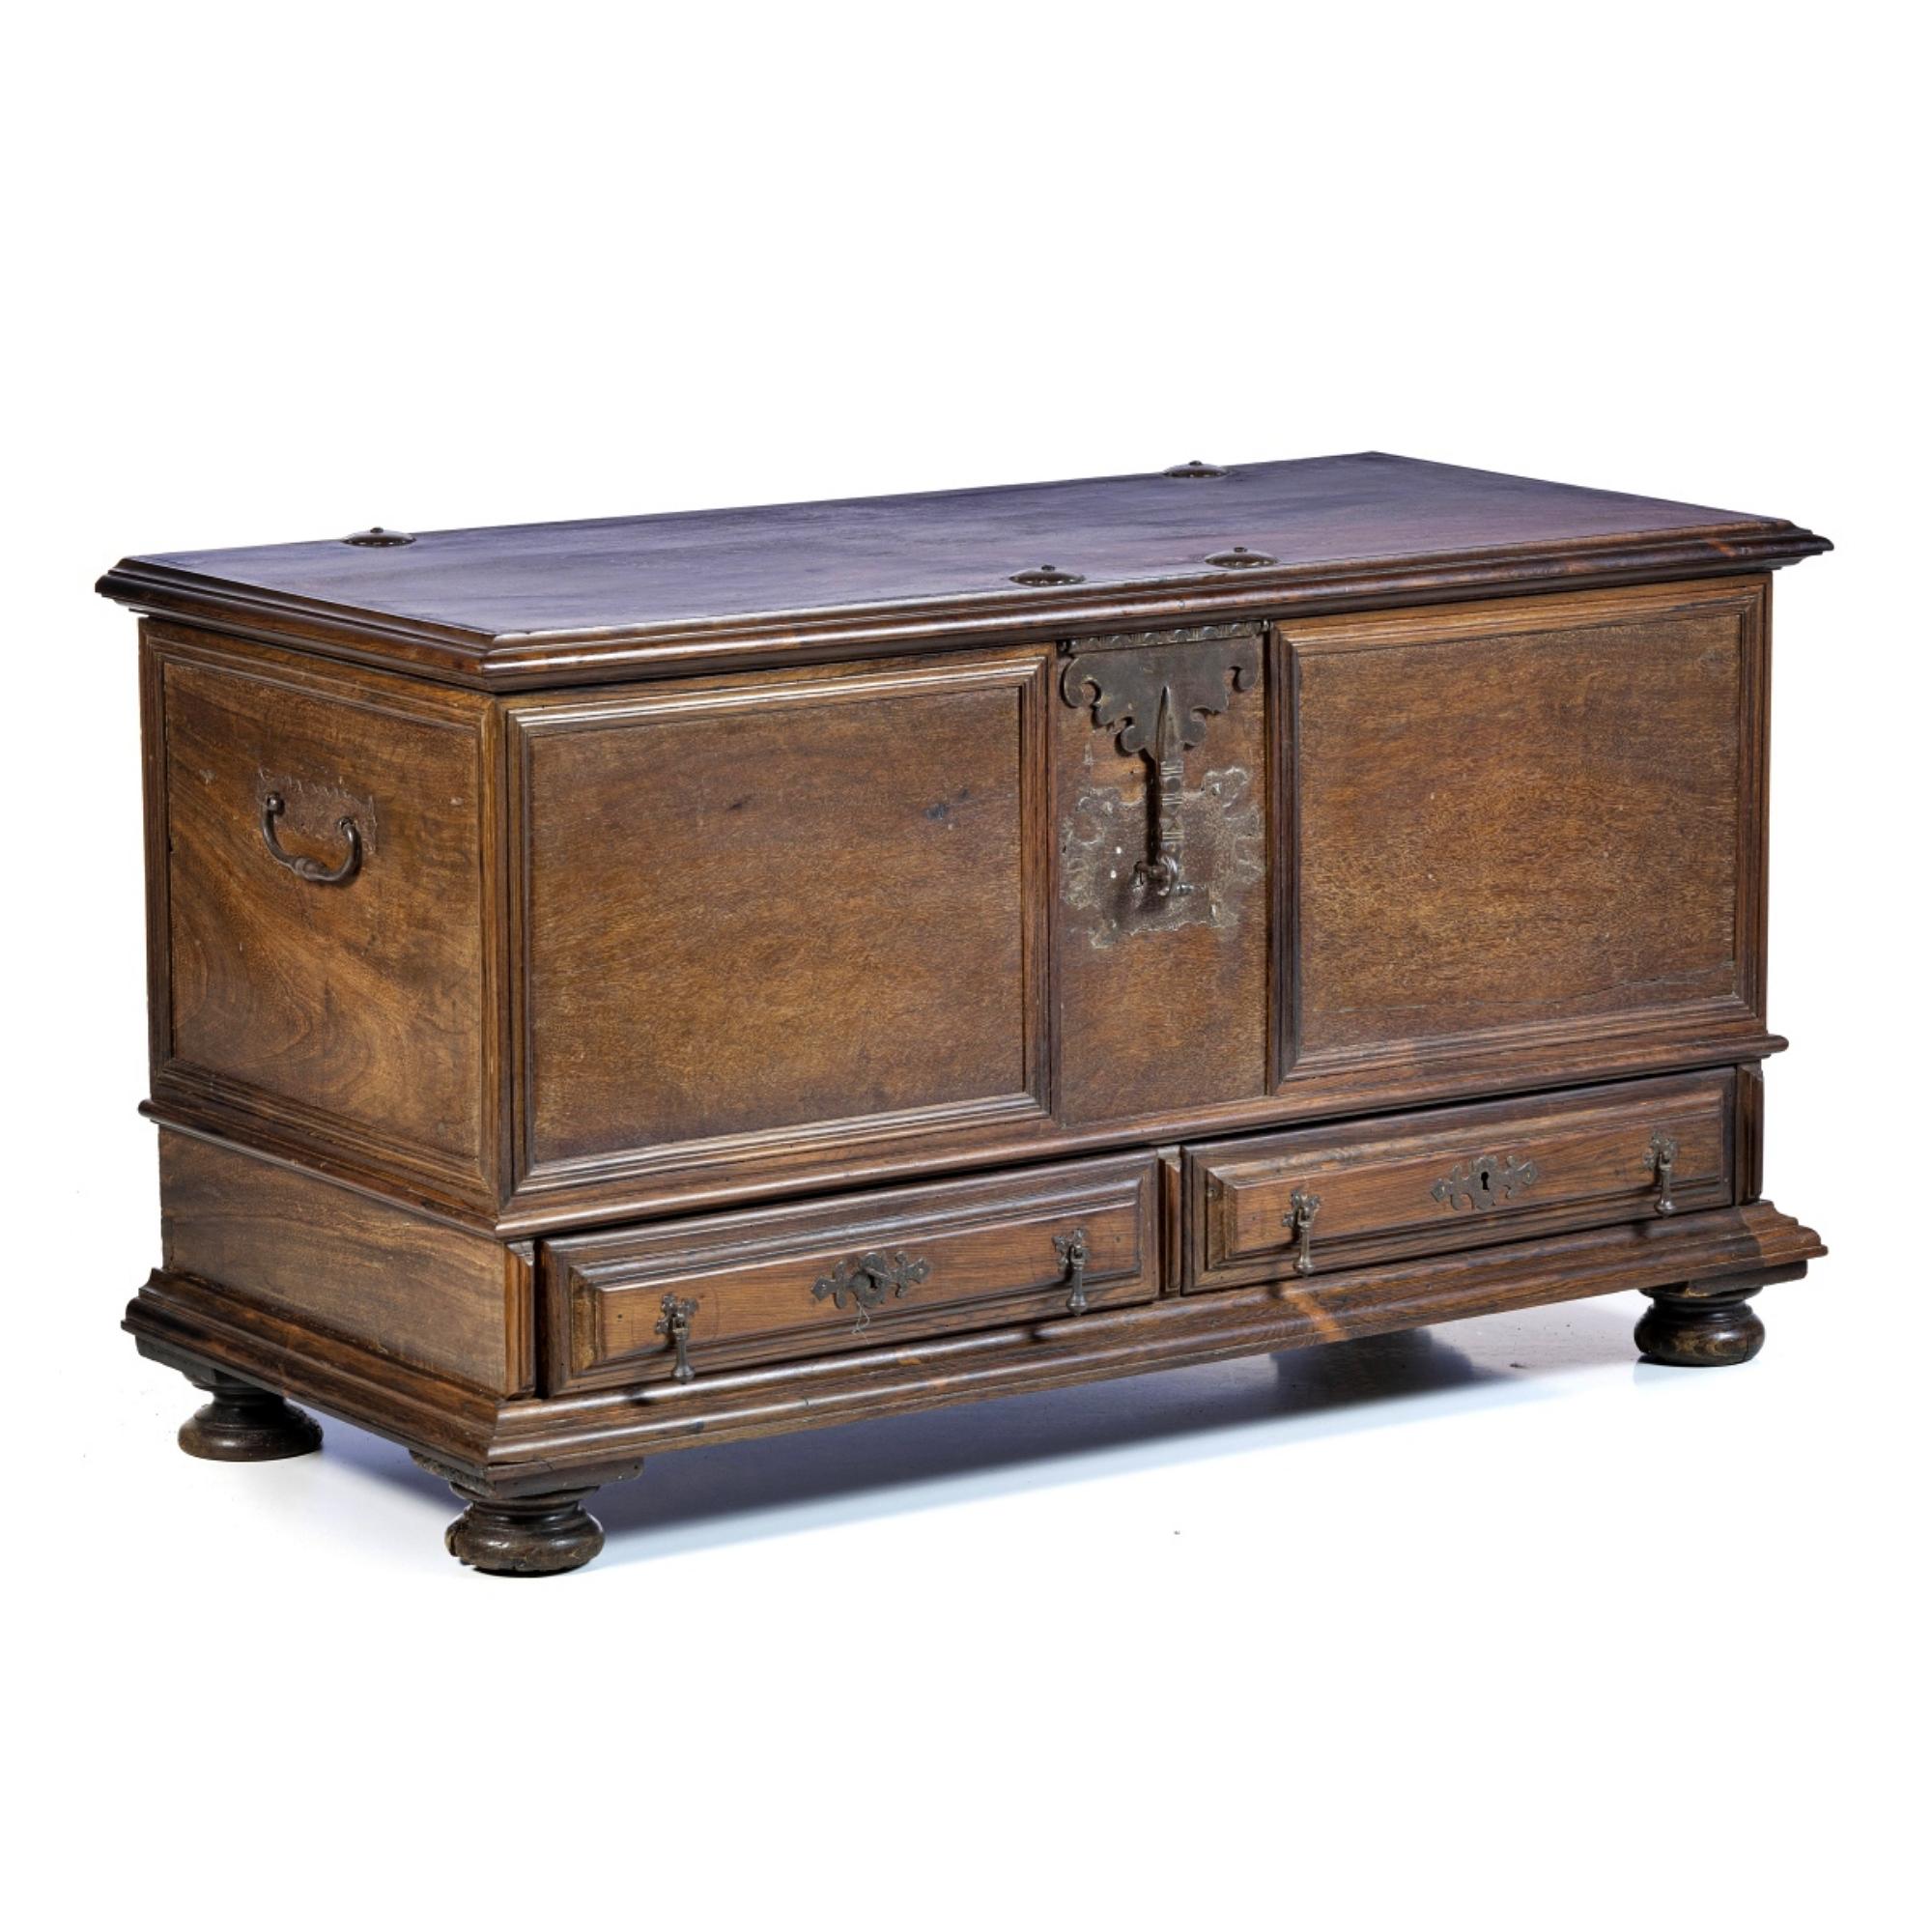 PORTUGUESE ROSEWOOD CHEST WITH TWO DRAWERS 17. Jahrhundert (Portugiesisch) im Angebot